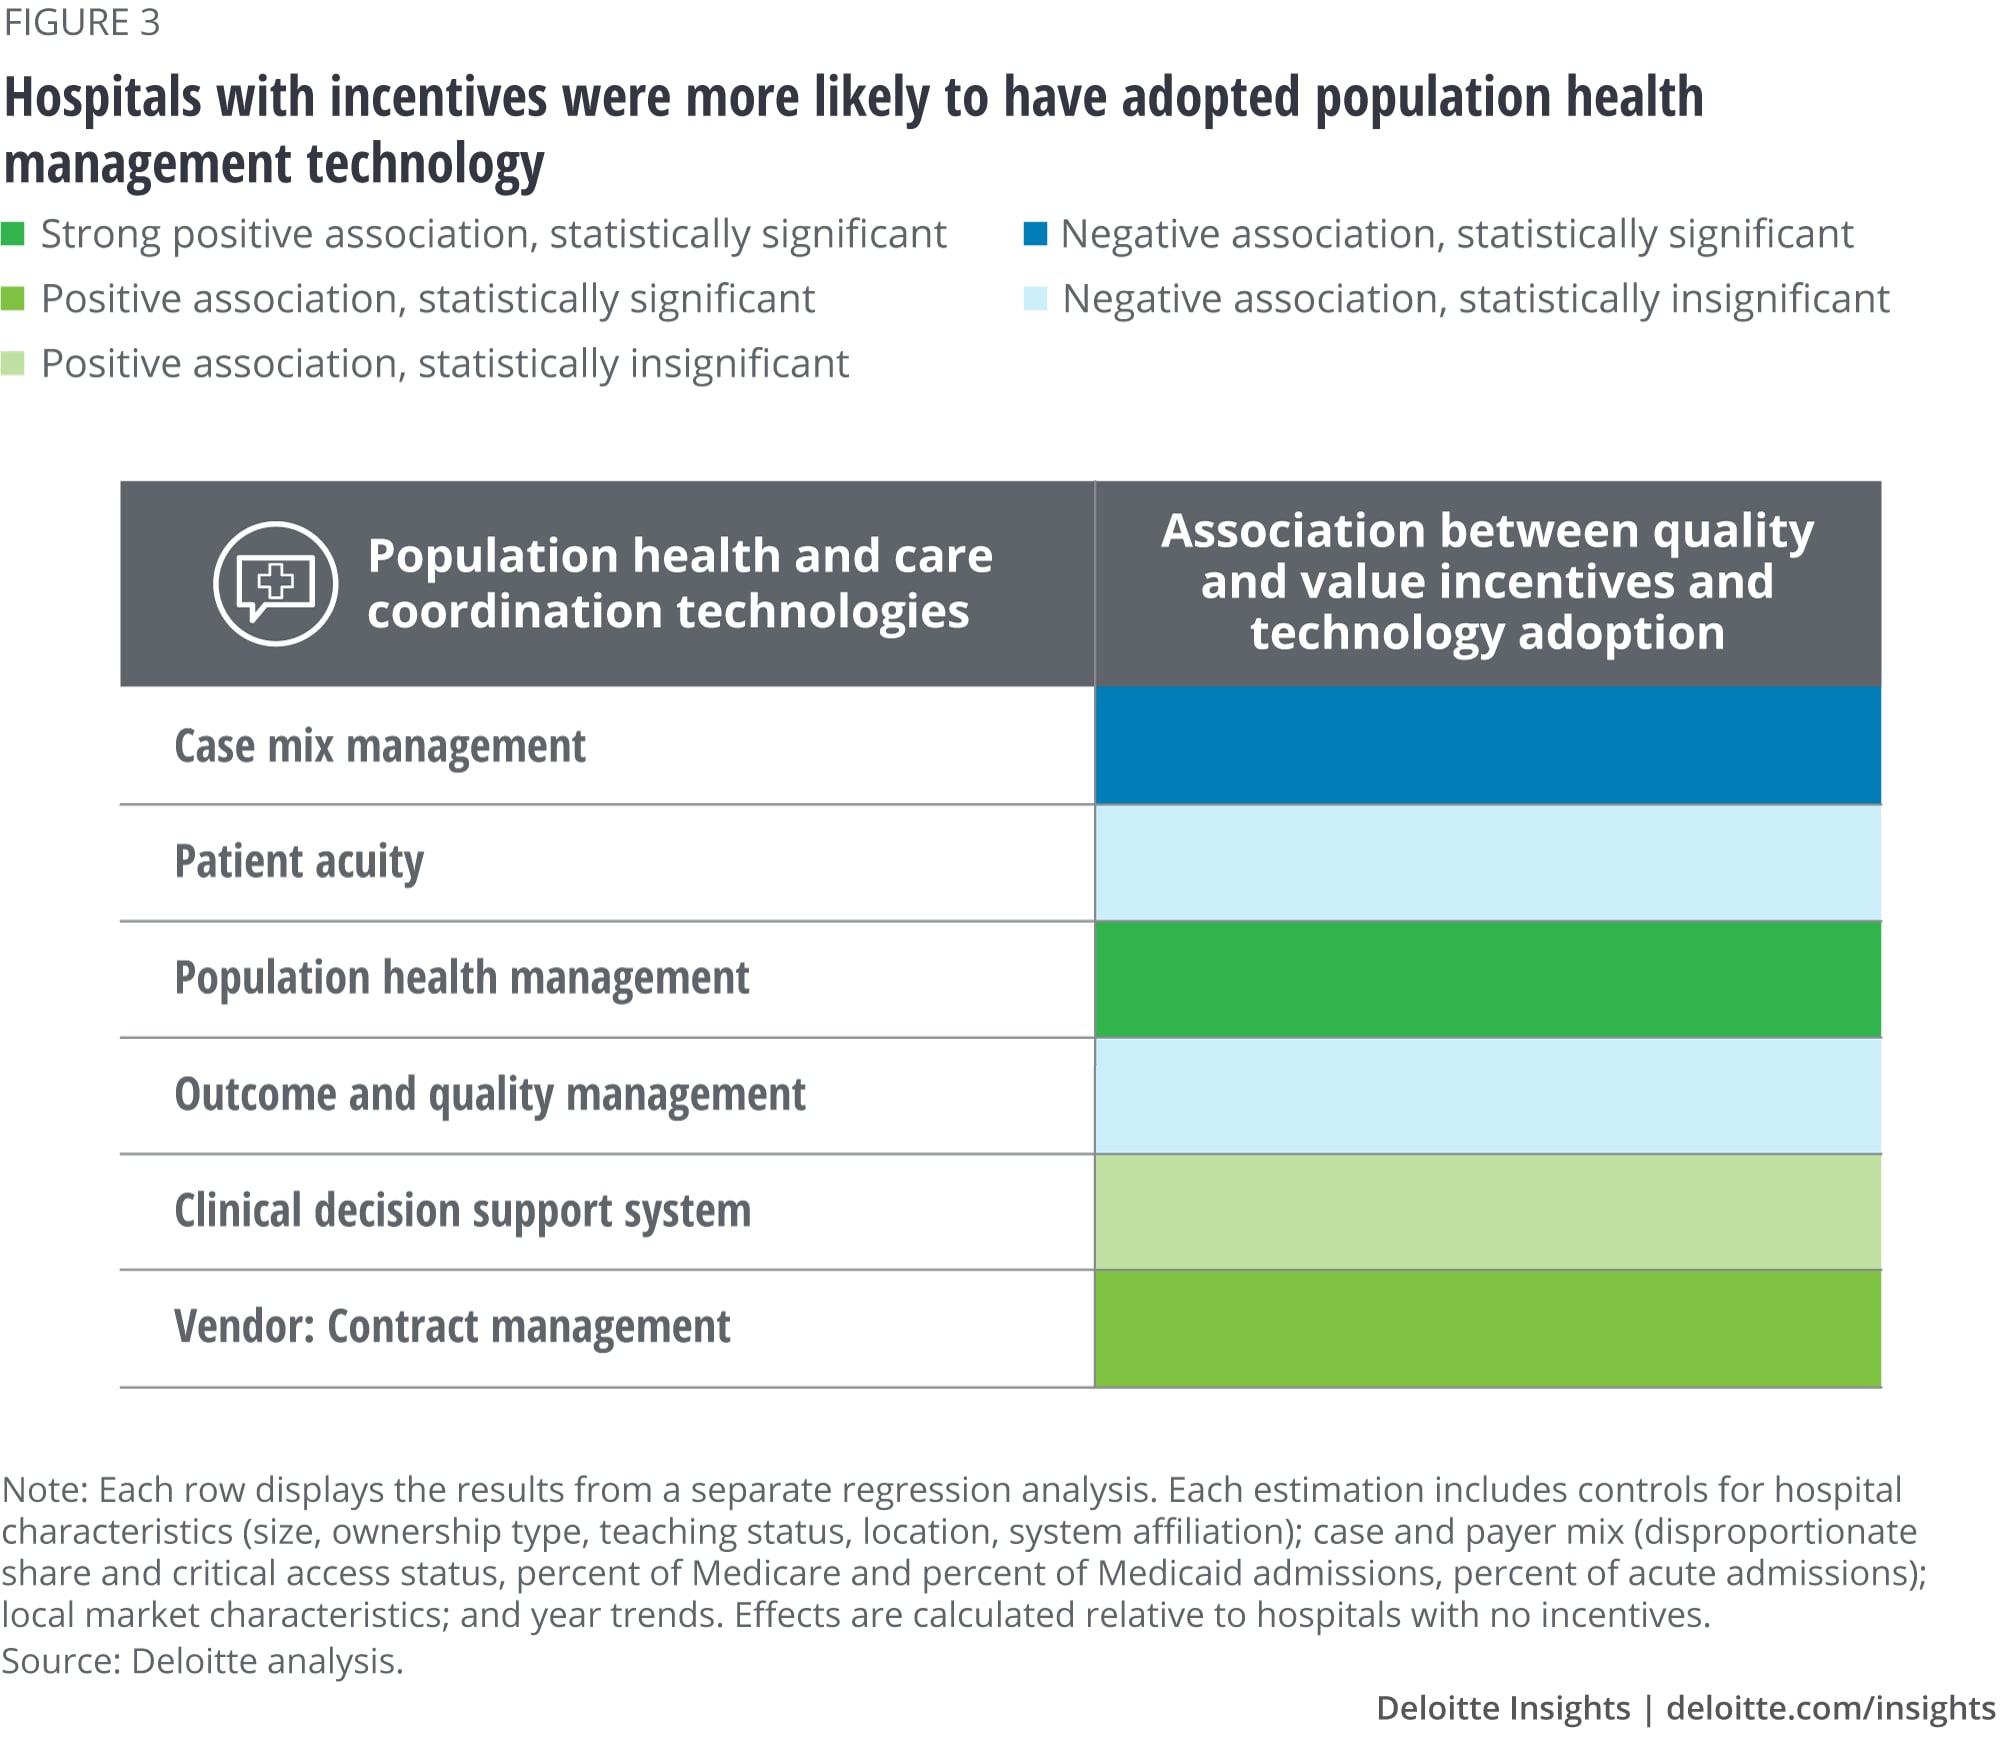 Hospitals with incentives were more likely to have adopted population health management technology